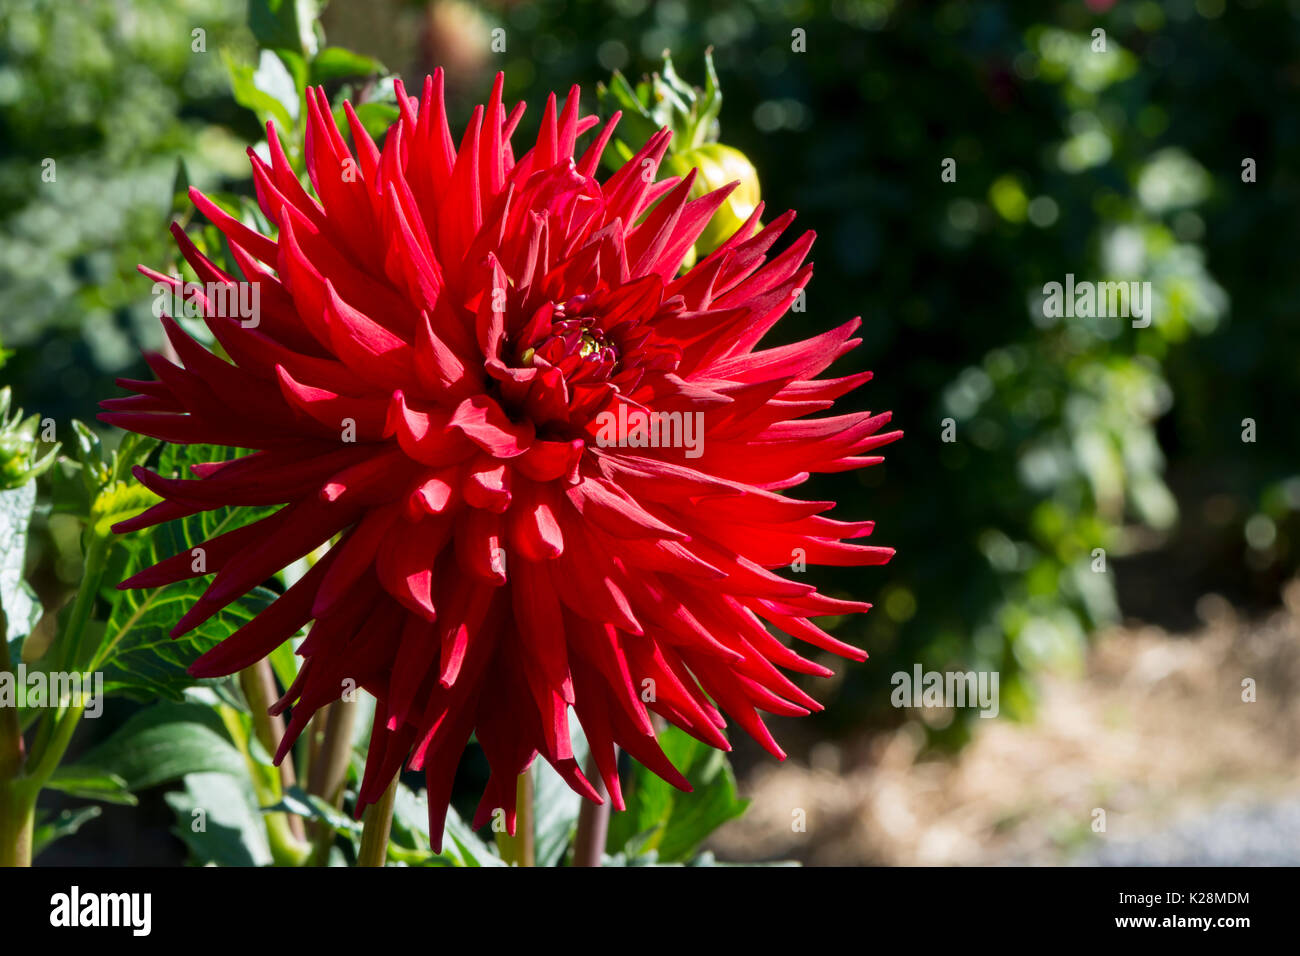 Full flower head of a Red Scarborough 2000 Dahlia categorised as a Red Medium Cactus dahlia. Growing in a natural garden setting. Stock Photo